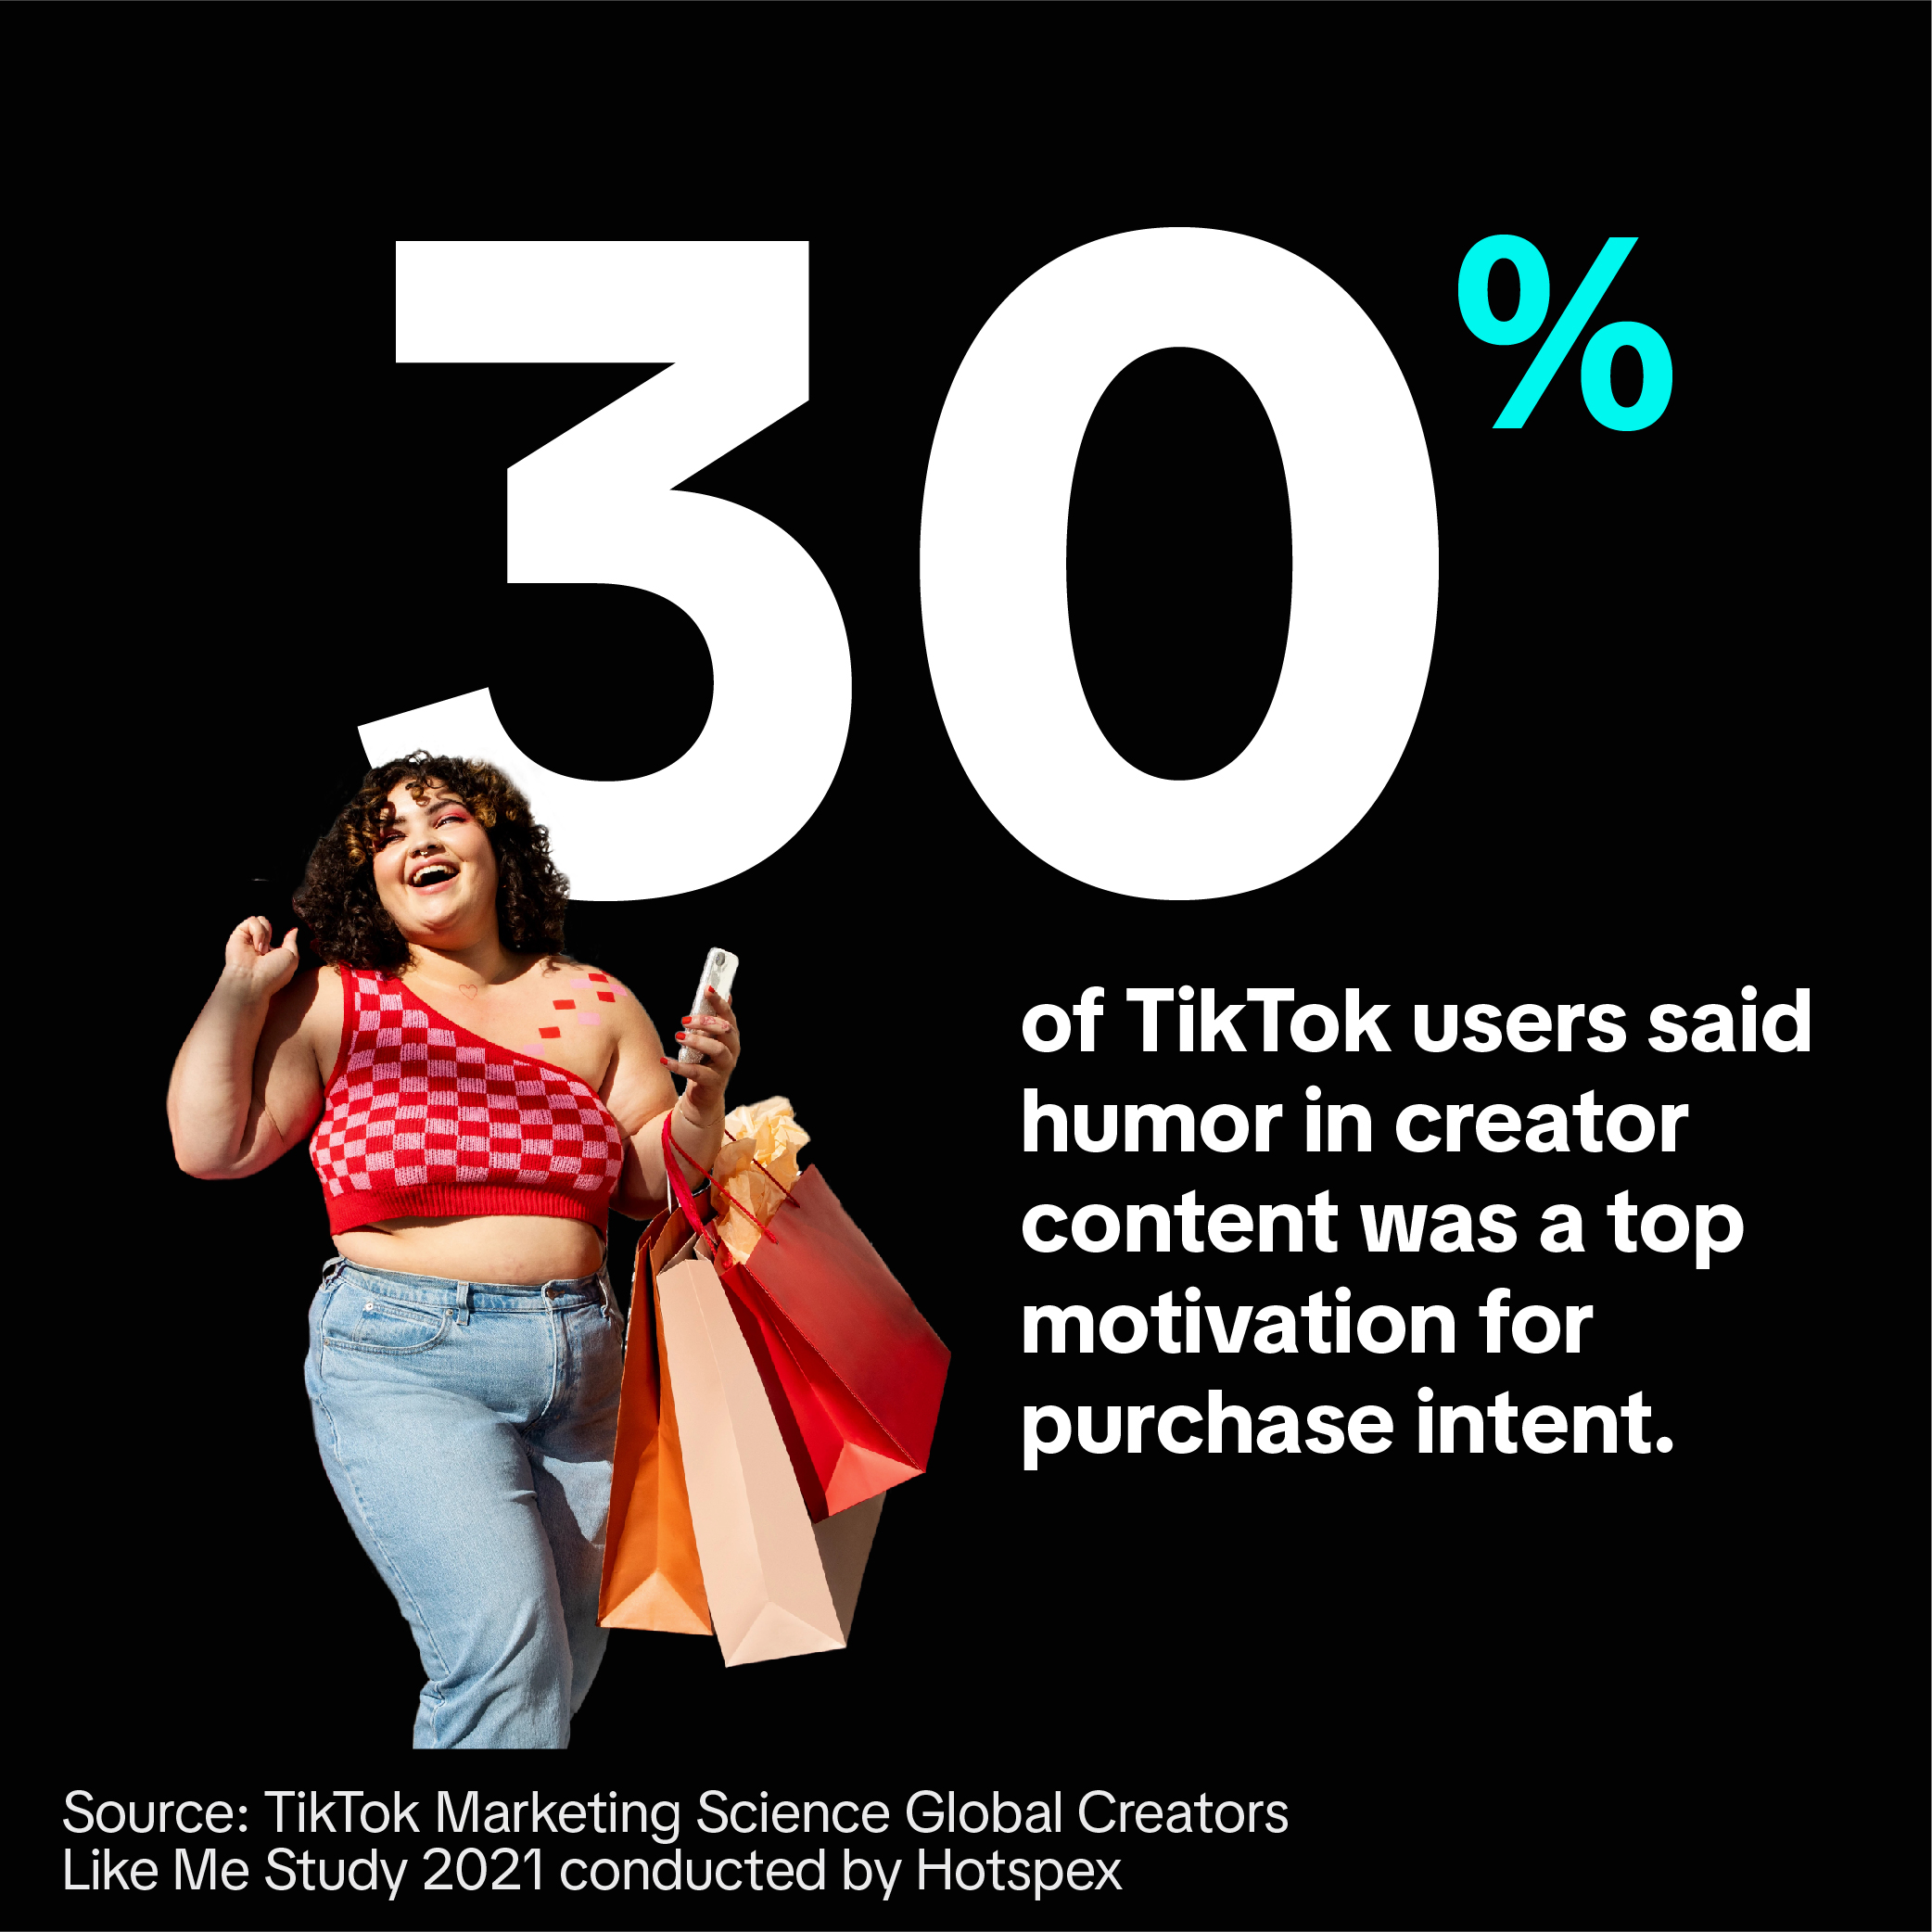 30% of TikTok users said humor in creator content was a top motivator for purchase intent